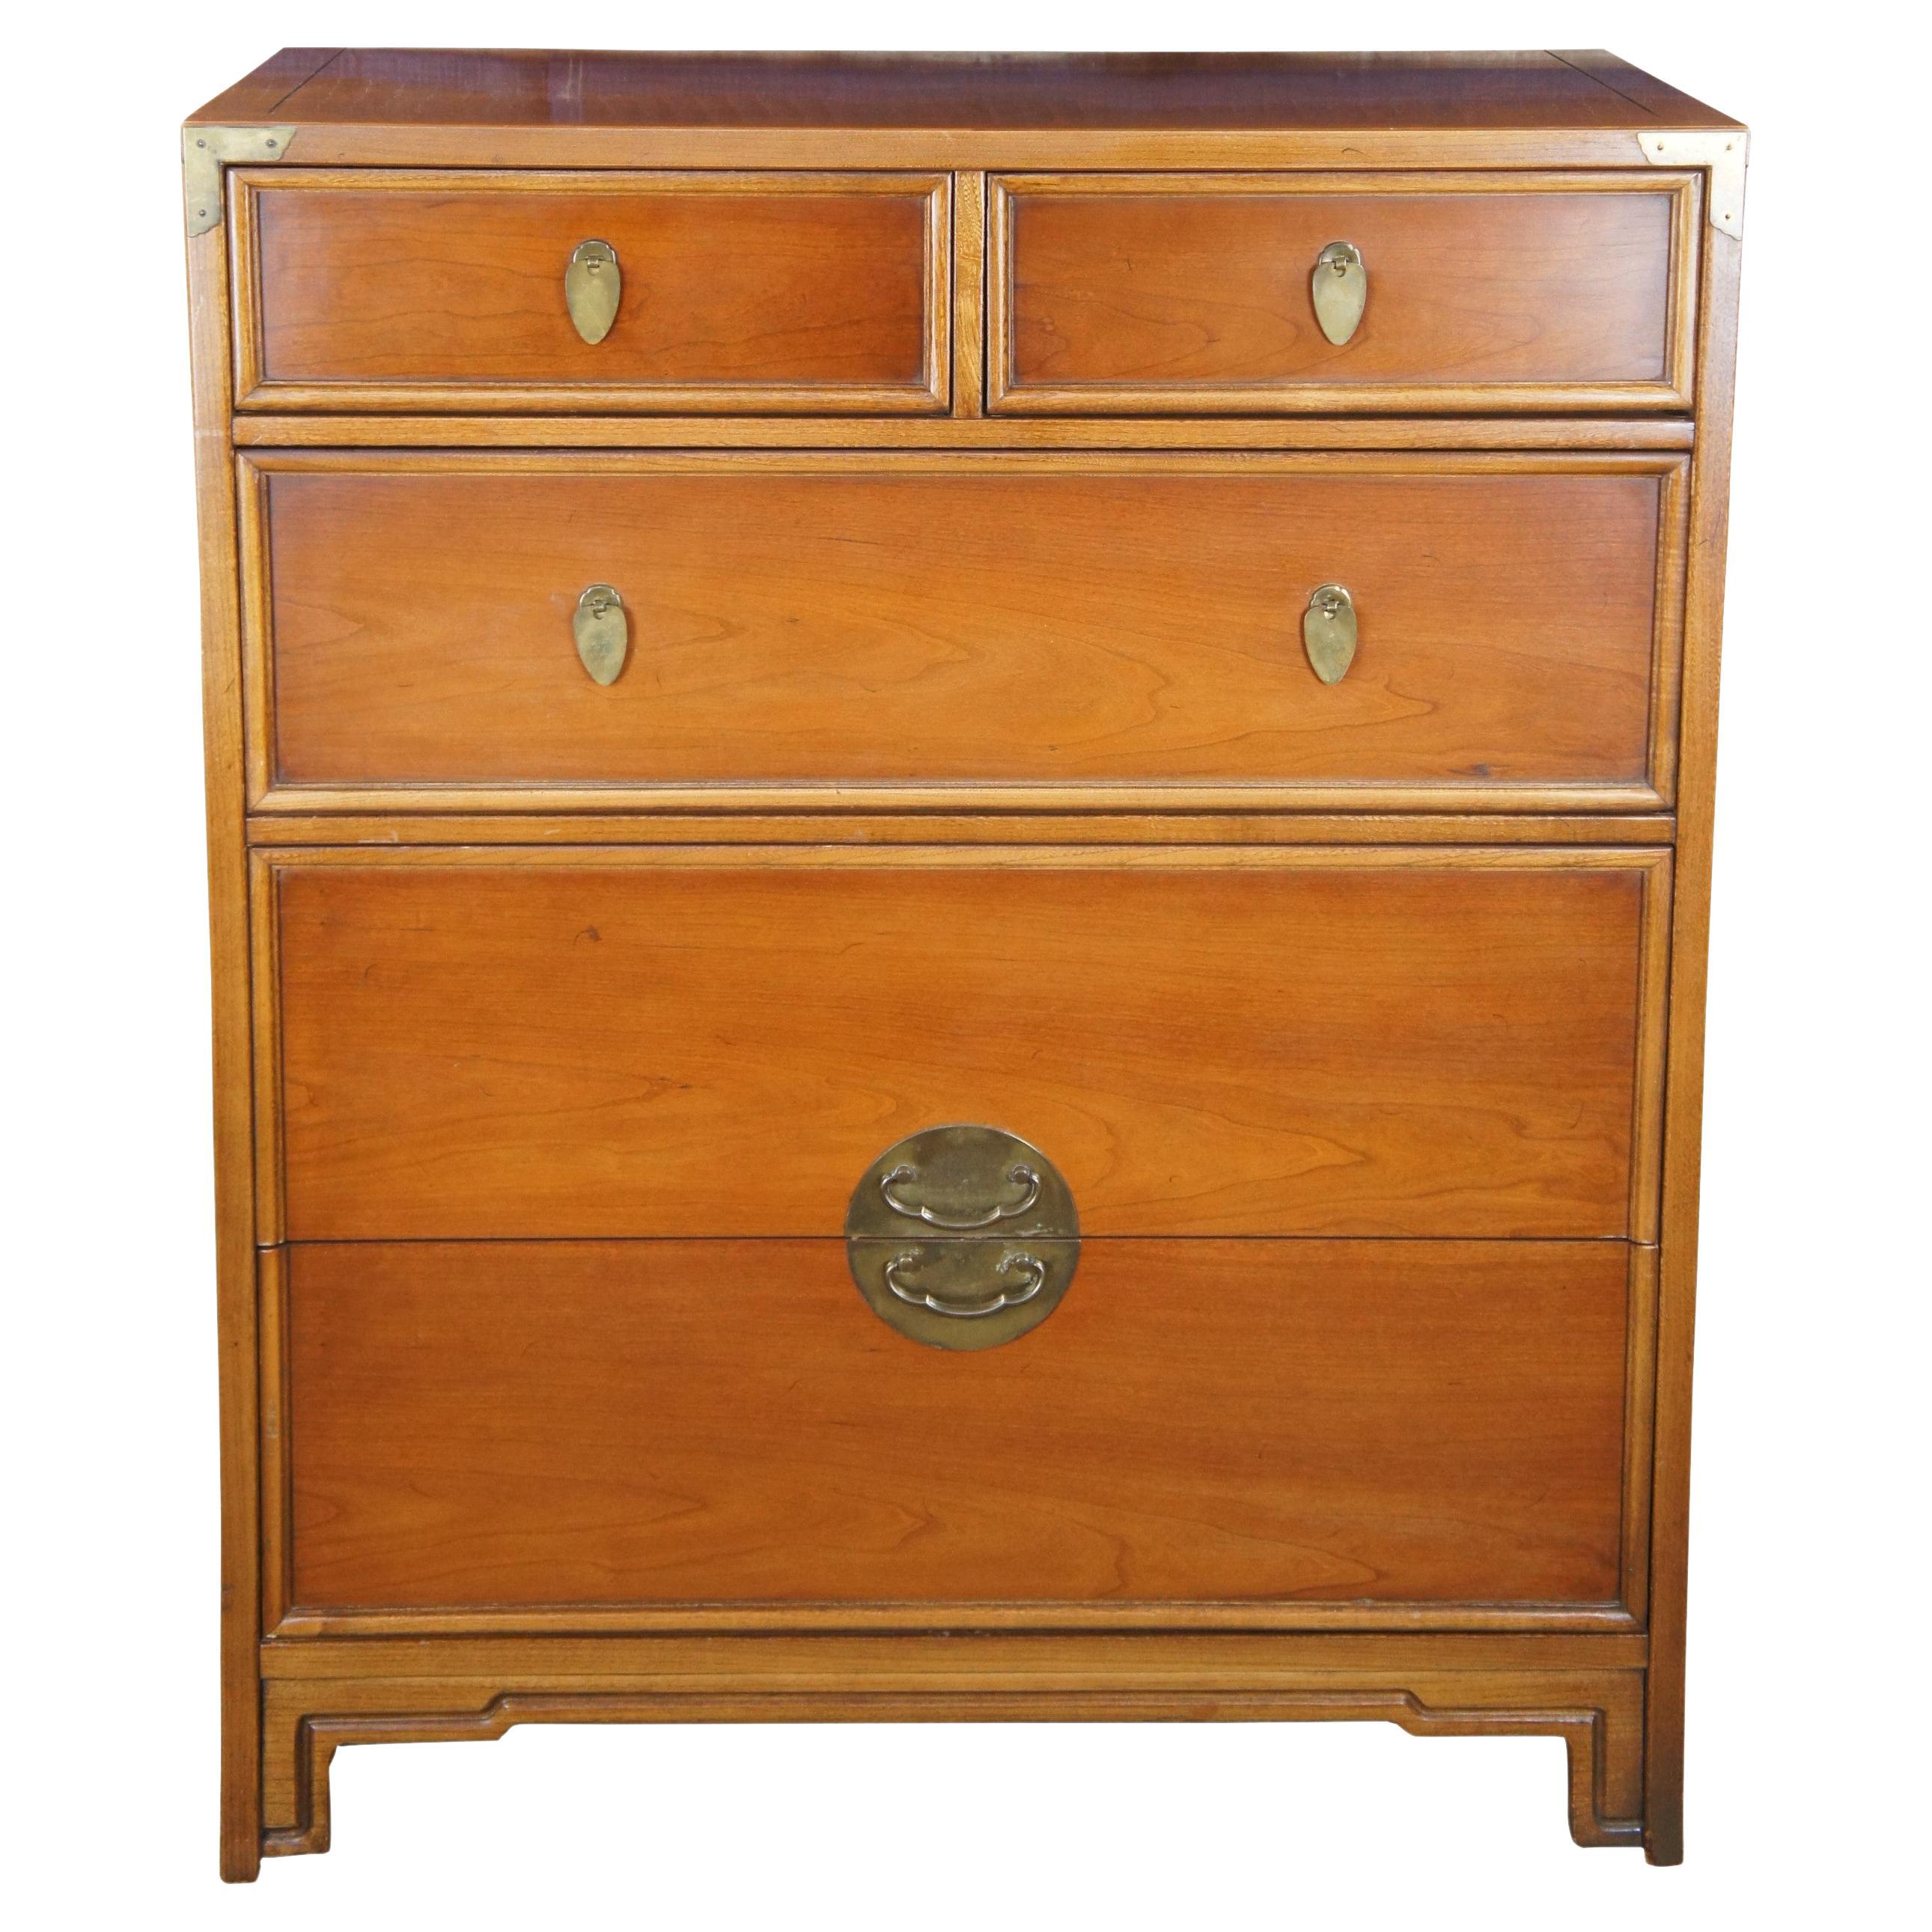 Kent Coffey Lotus Chinoiserie Campaign Cherry Tallboy Dresser Chest of Drawers